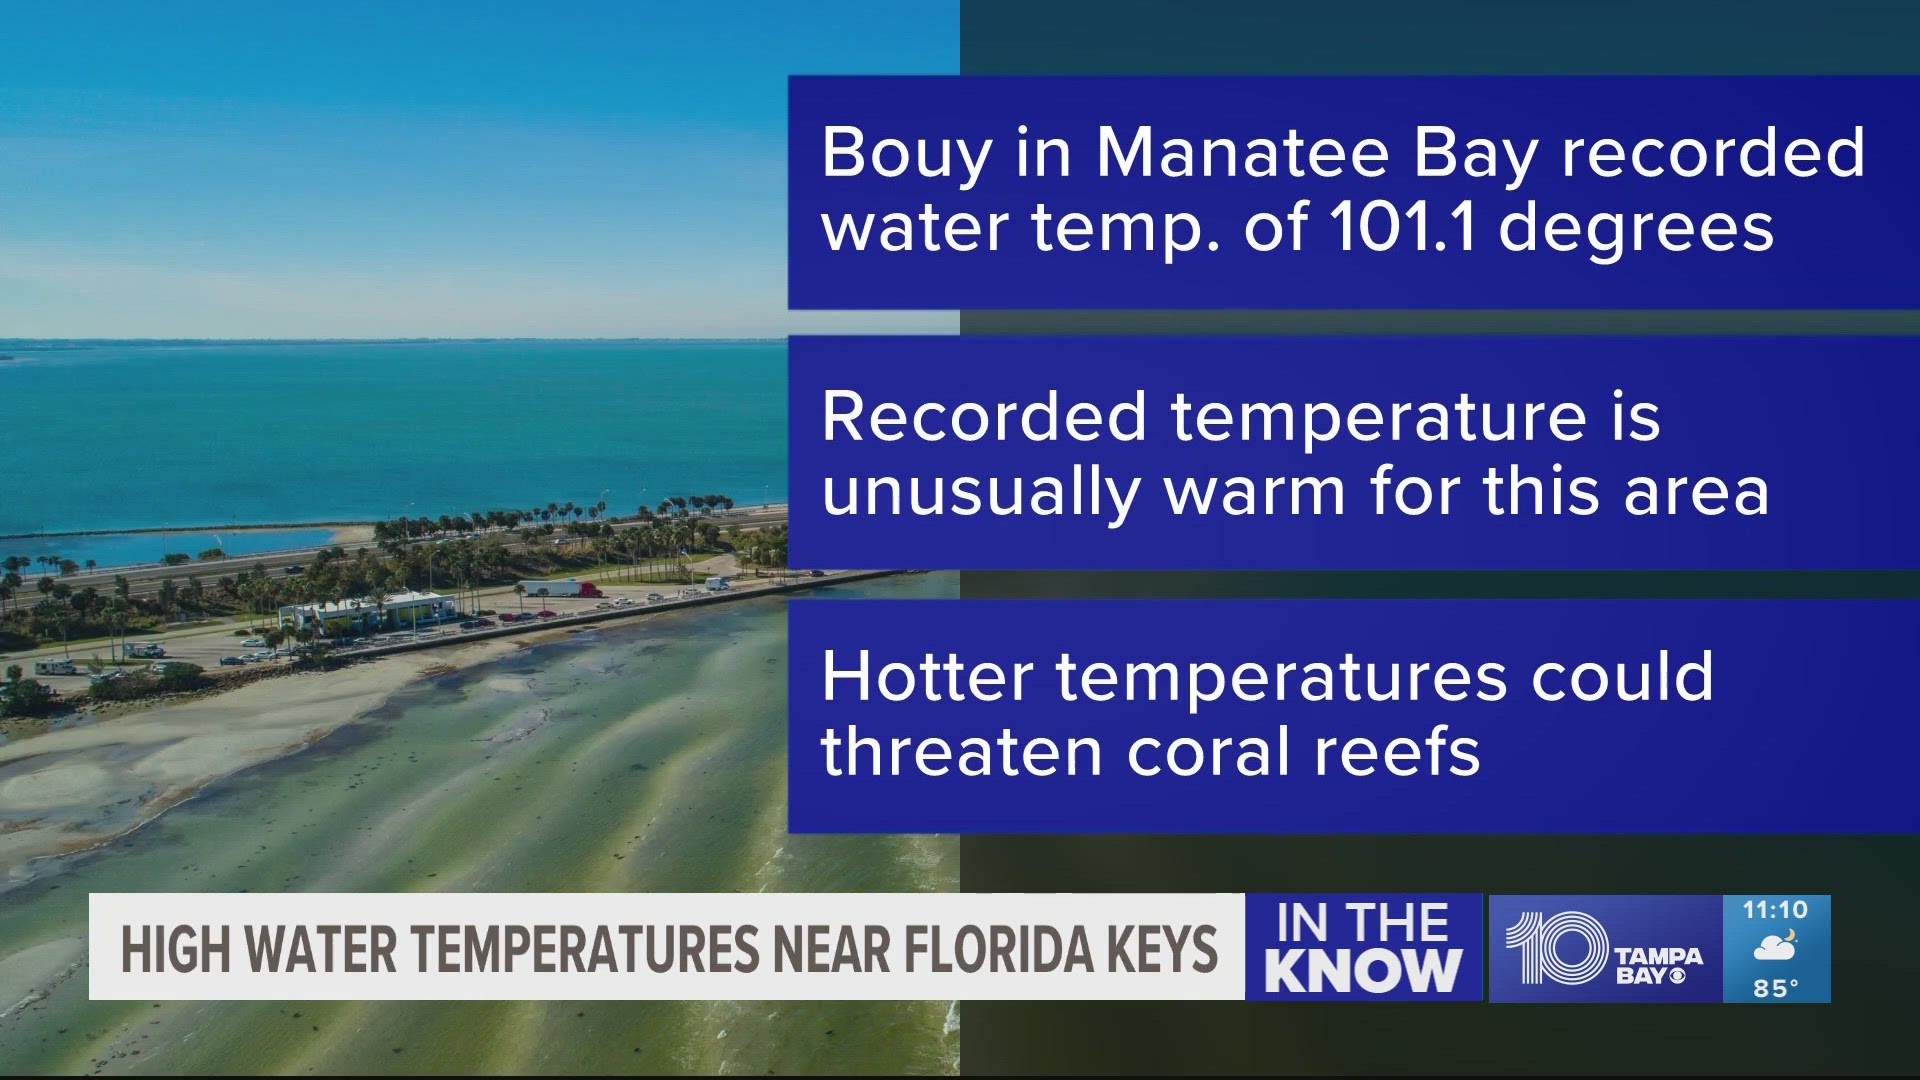 "These waters were some of the hottest ever recorded on Earth," NOAA hurricane scientist Dr. Jeff Masters said.